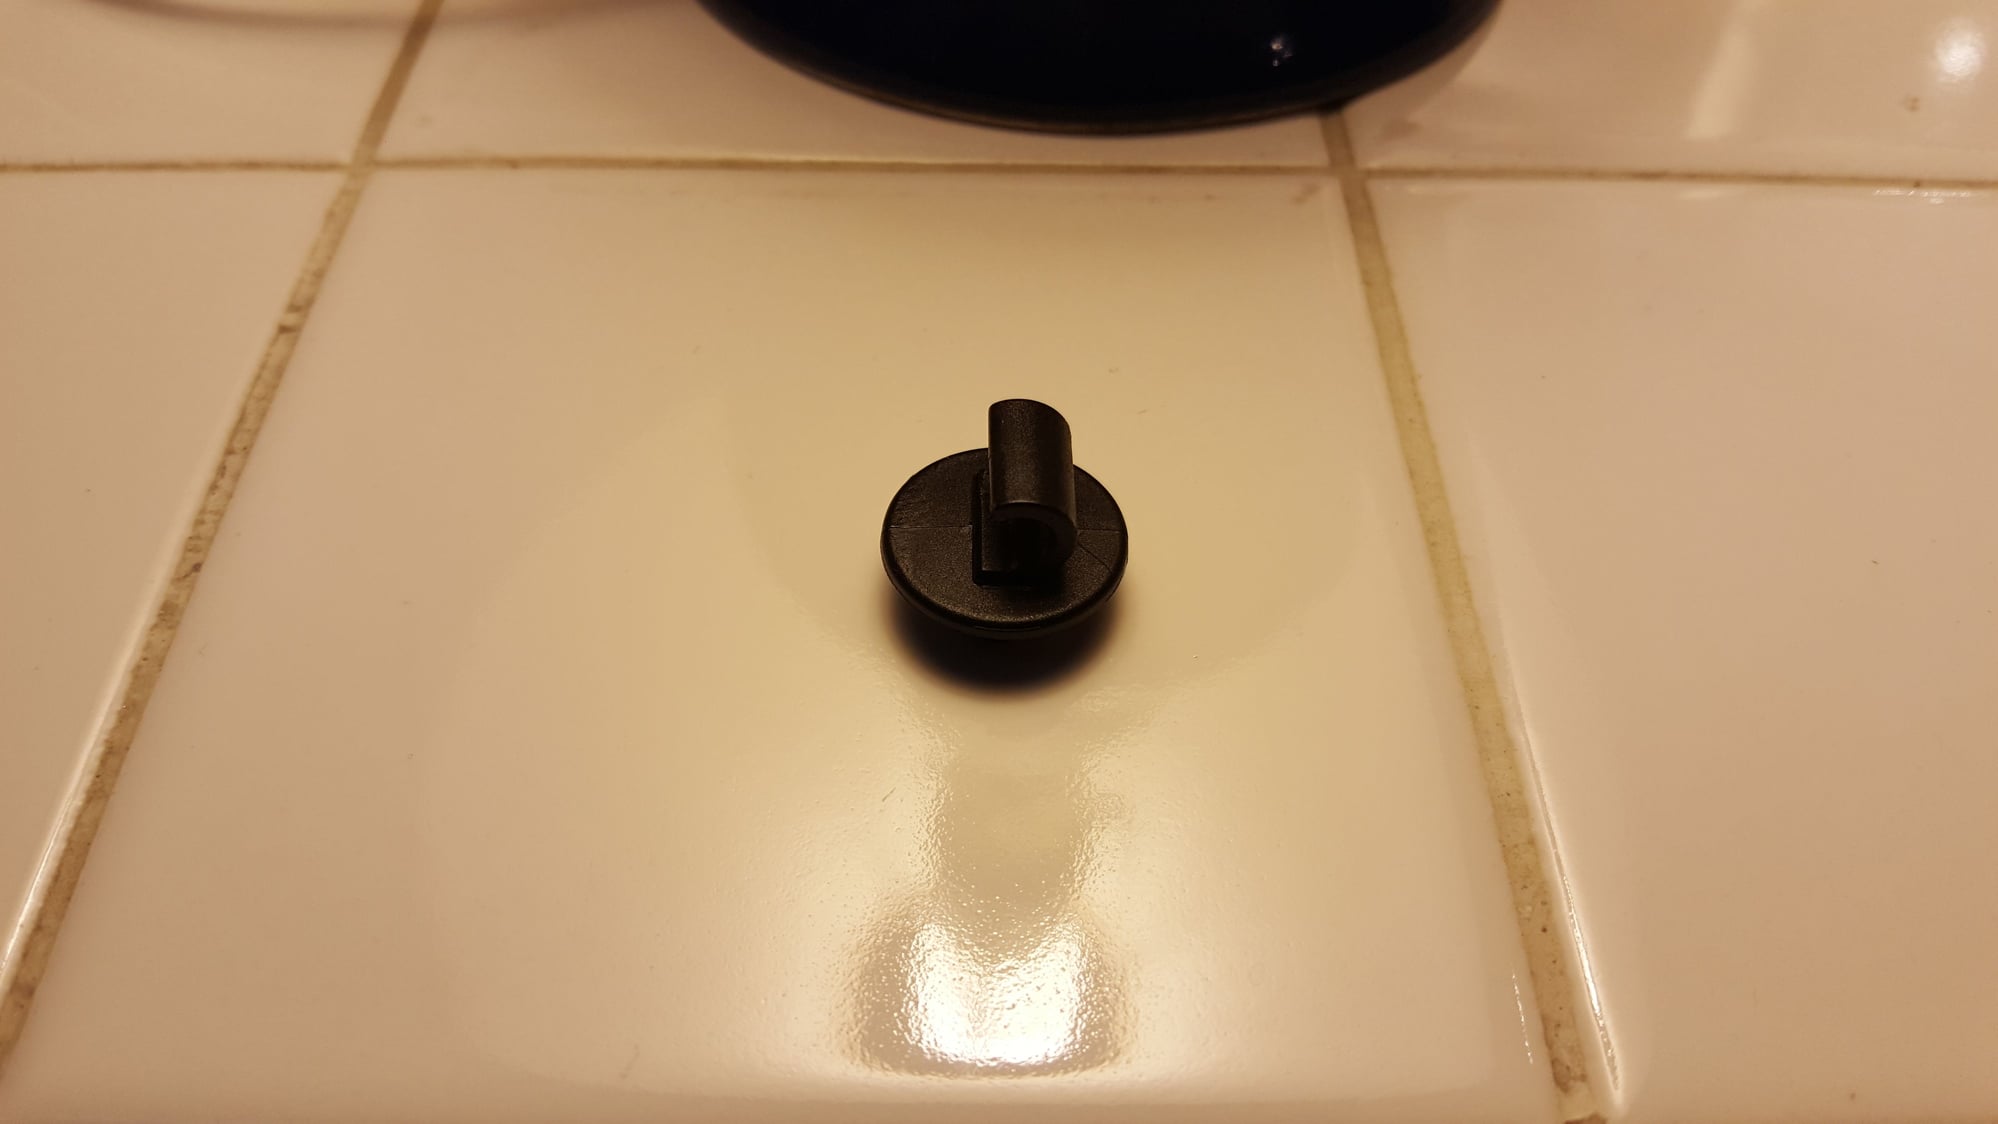 Miscellaneous - Wanted: 2009-2013 Mercedes E-Class Passg Rear Trunk Grommet - Used - 2009 to 2013 Mercedes-Benz E350 - Dallas, TX 75229, United States